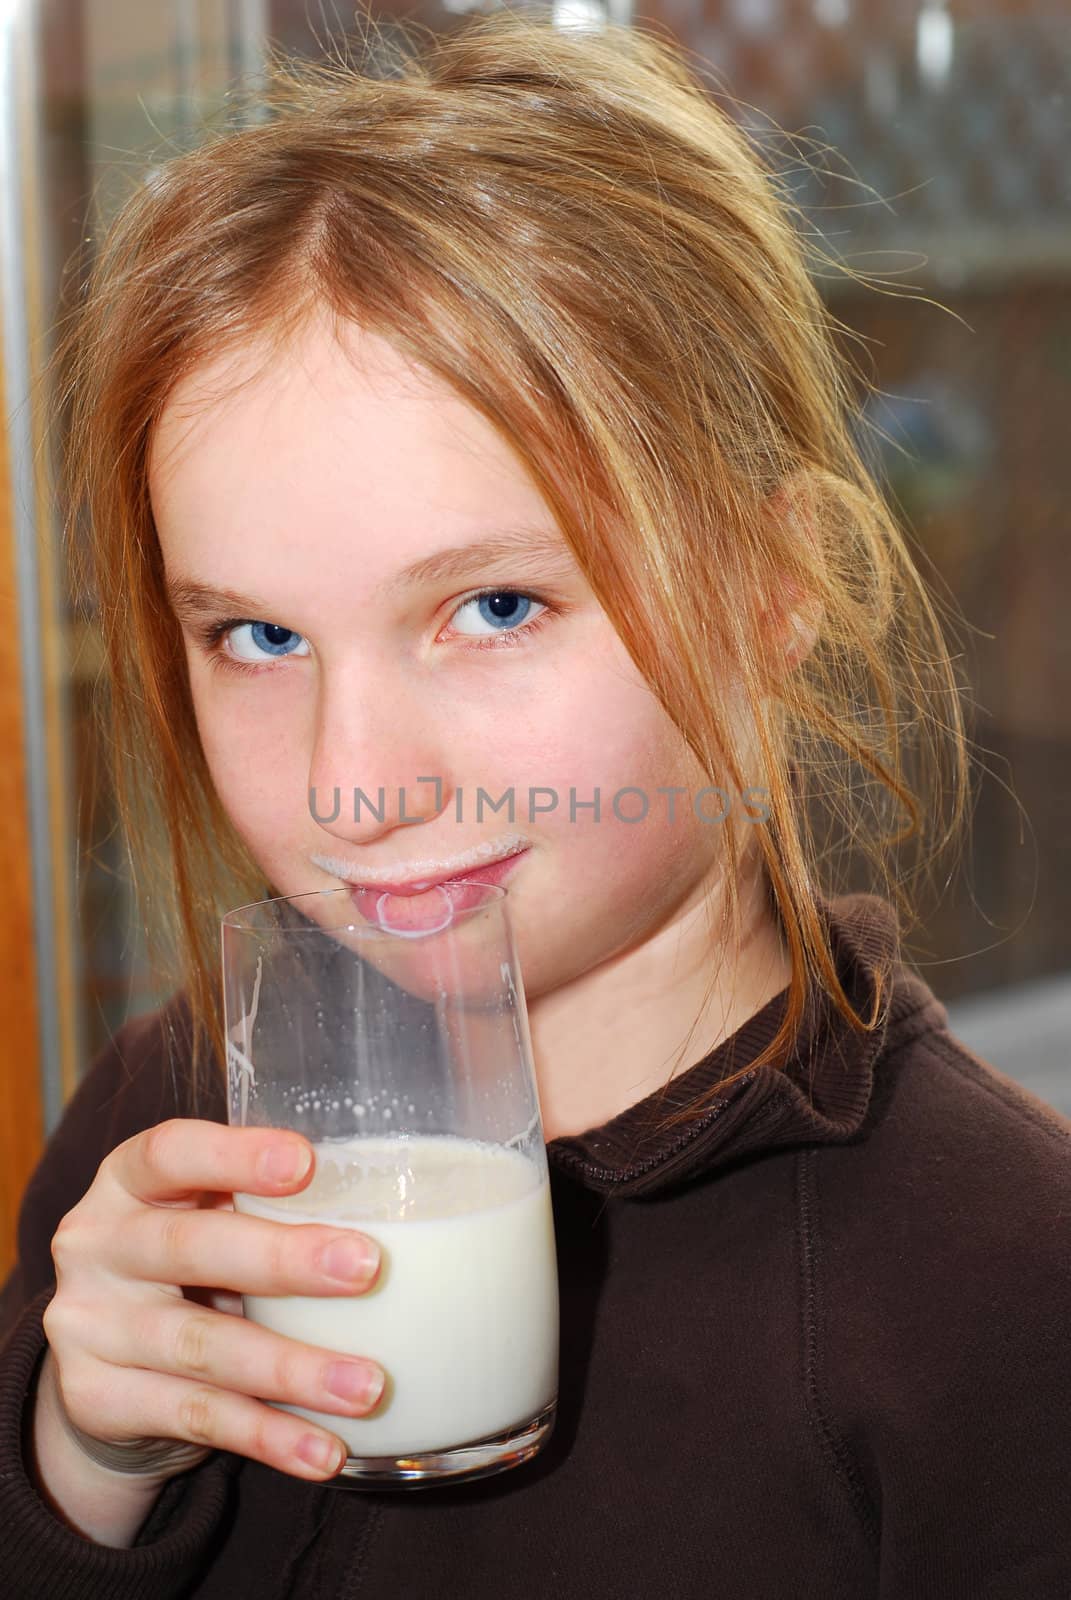 Young girl holding a glass of milk in the morning